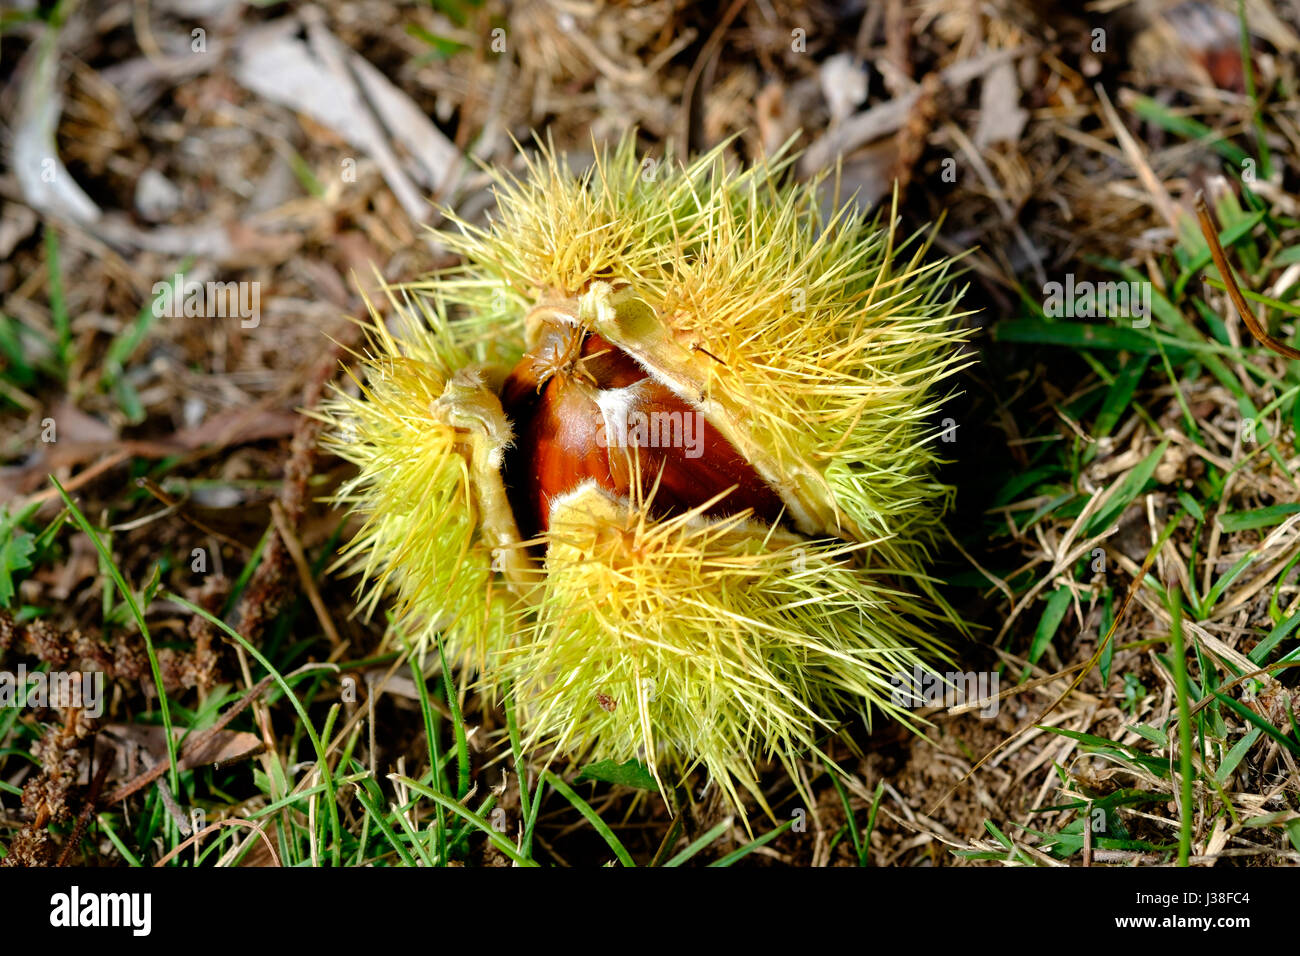 A single chestnut burr sitting on the ground, bursting open to reveal the nuts inside. Stock Photo